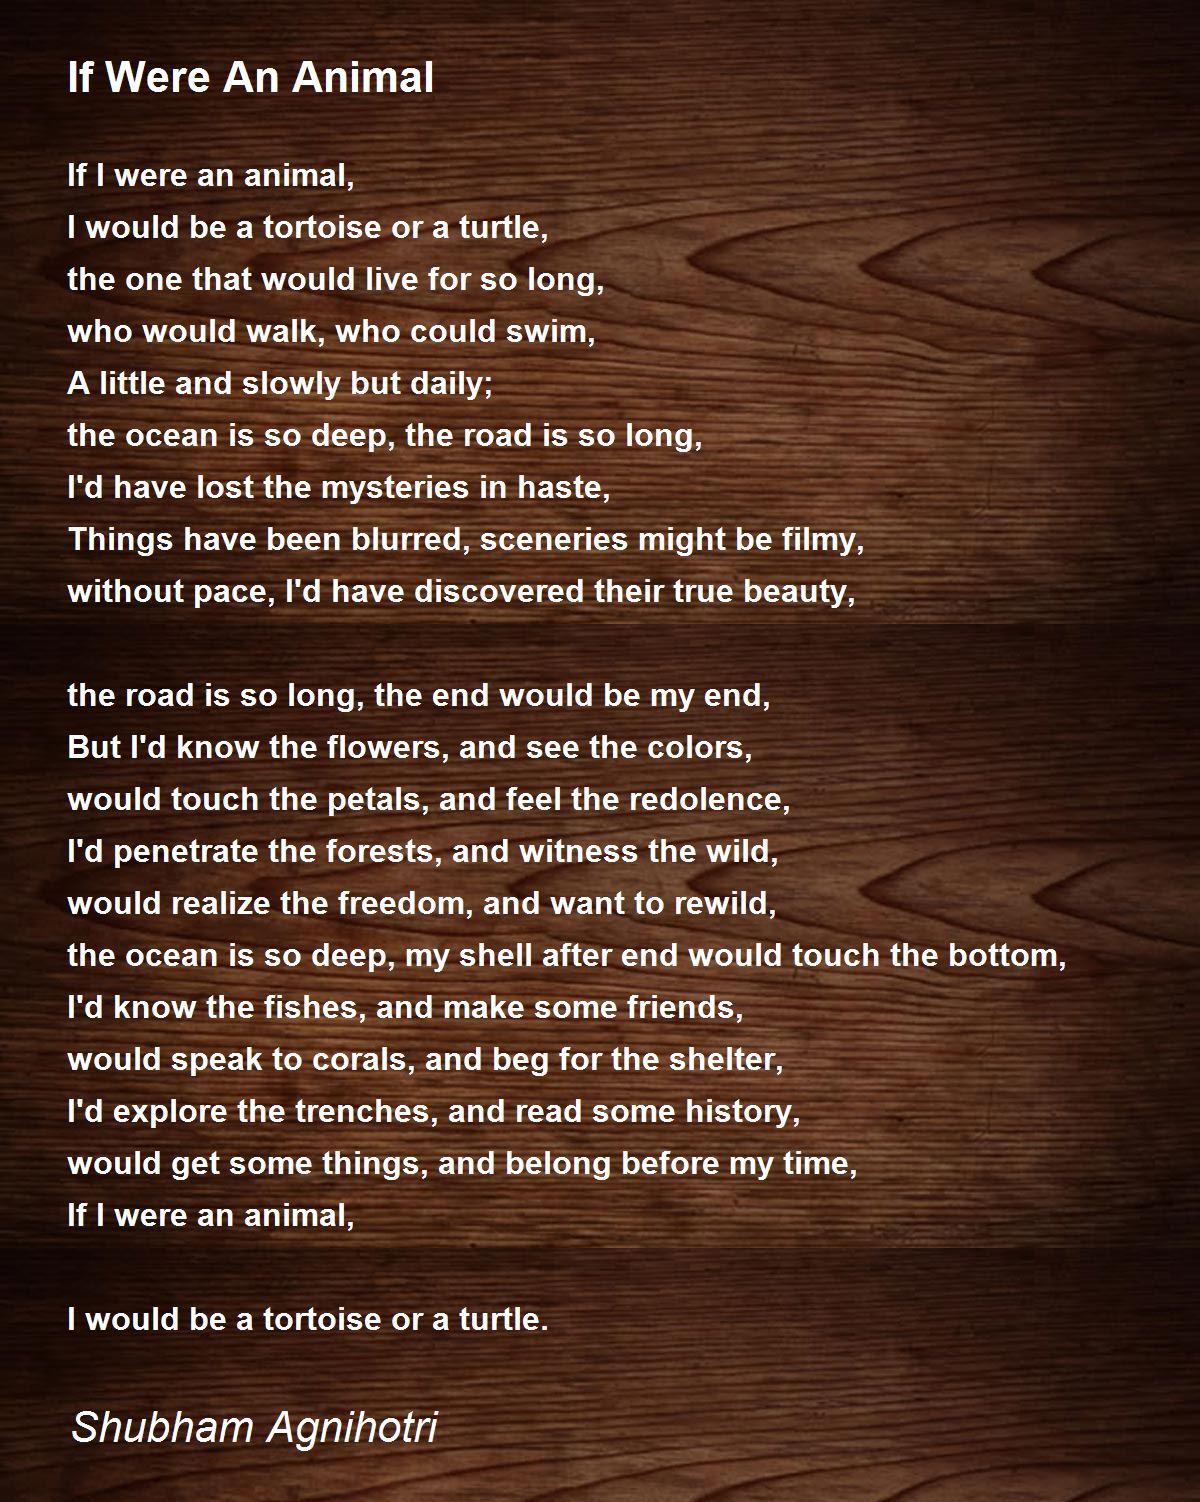 If Were An Animal - If Were An Animal Poem by Shubham Agnihotri